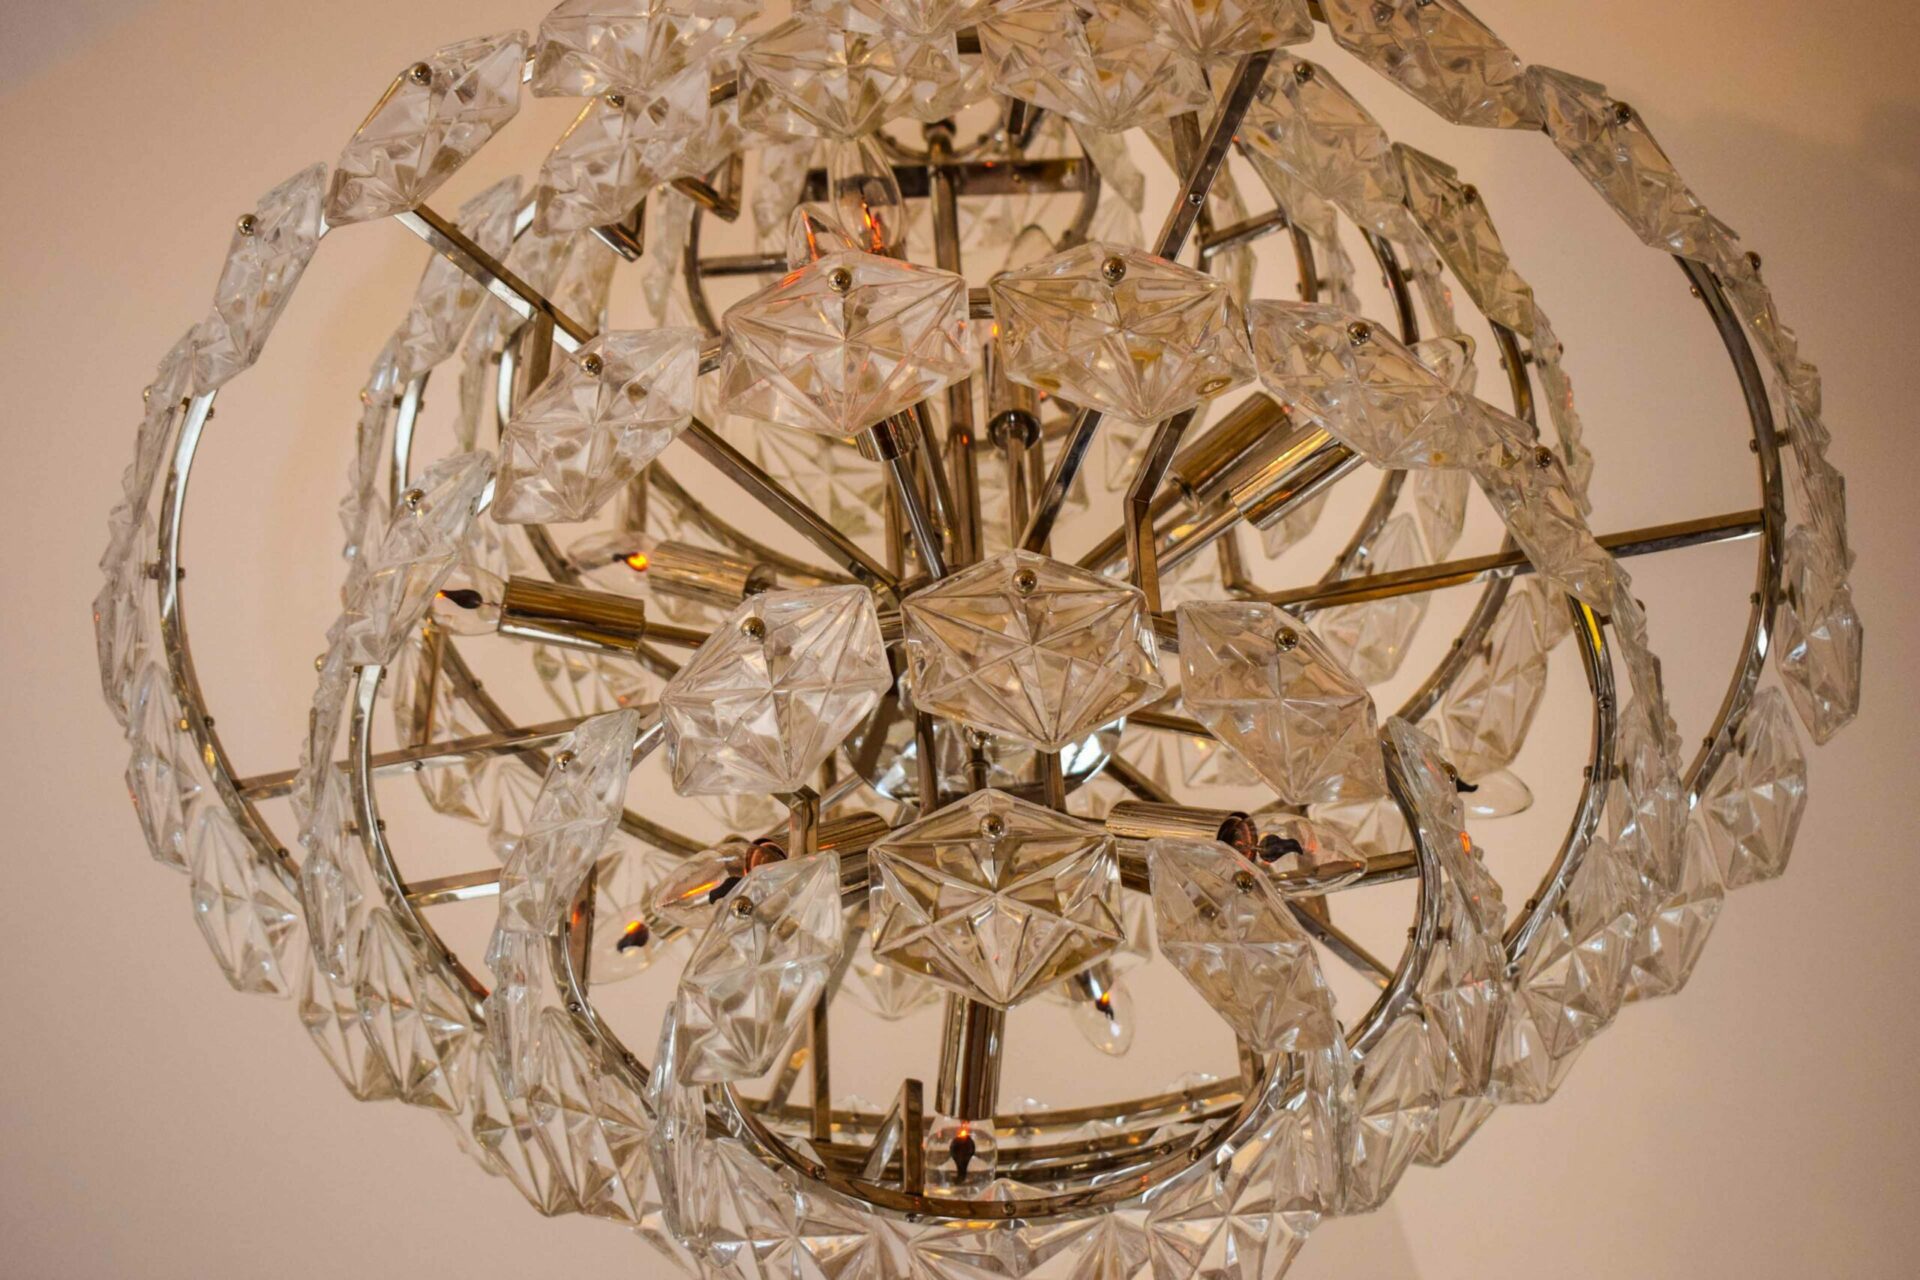 The chandelier in the entrance hallway to our Skyfall Luxury Hideaway